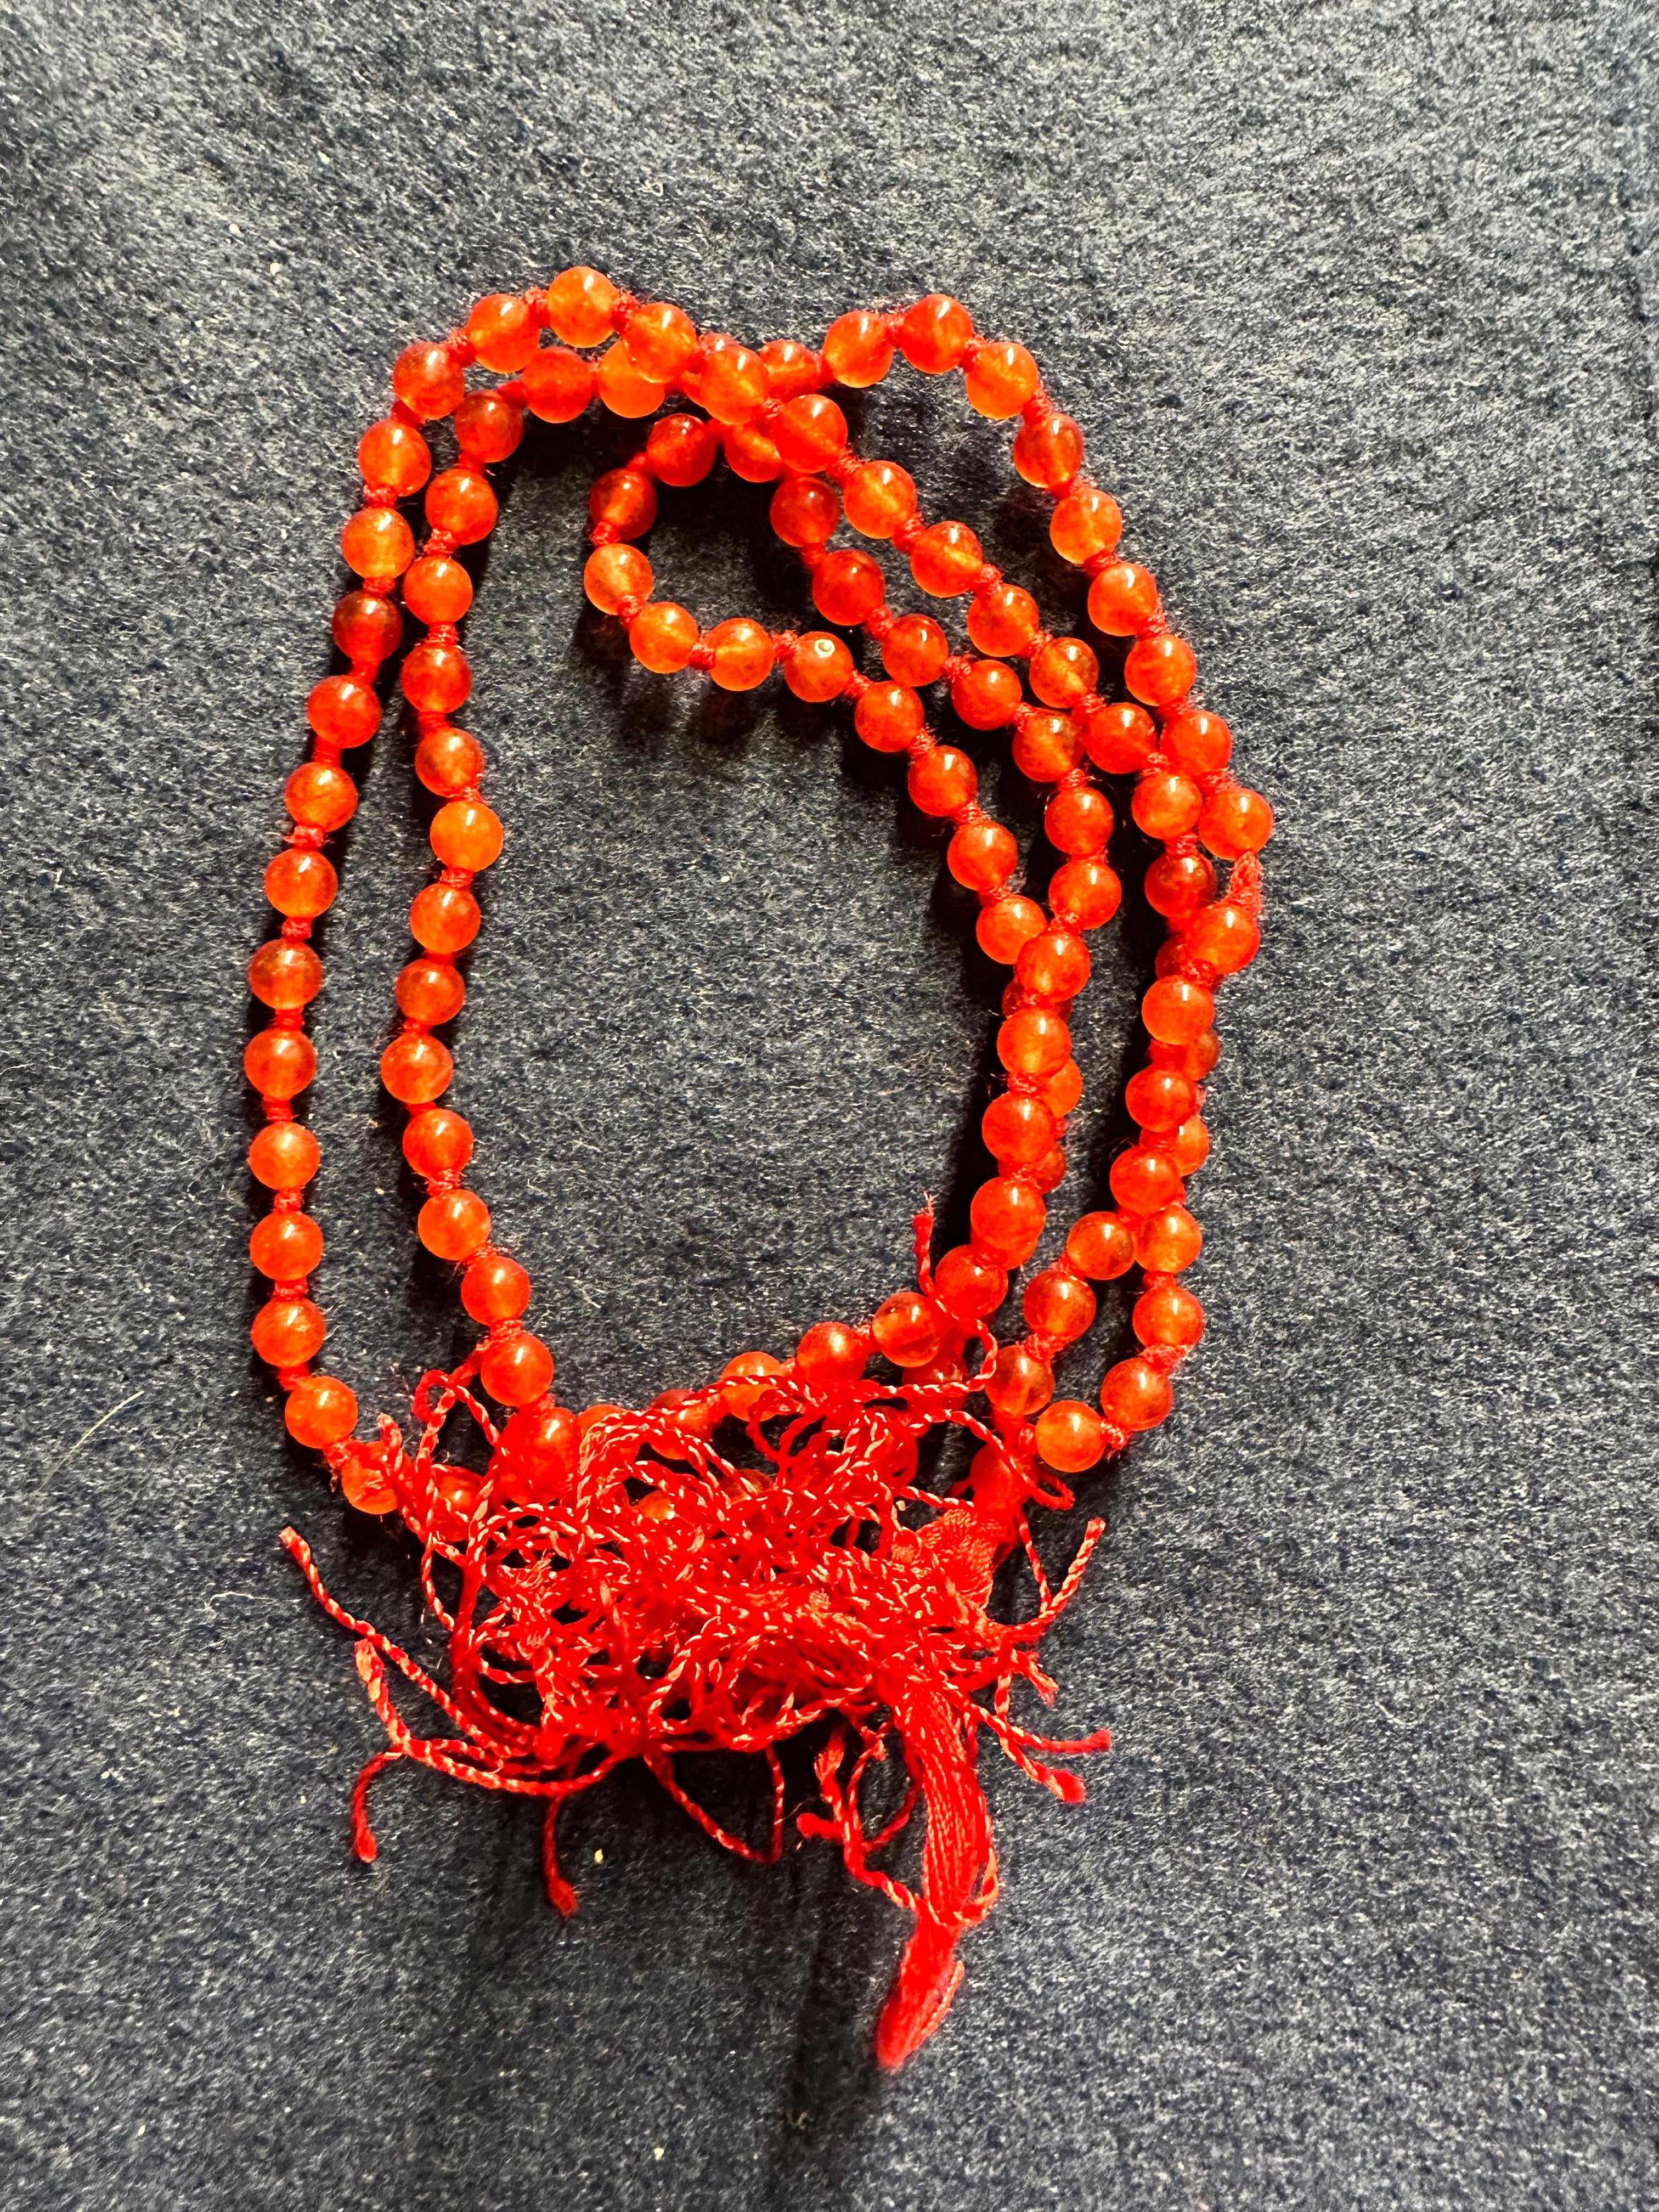 Carnelian Mala (108 Beads on Knotted Thread) – Small Beads - The Amma Store